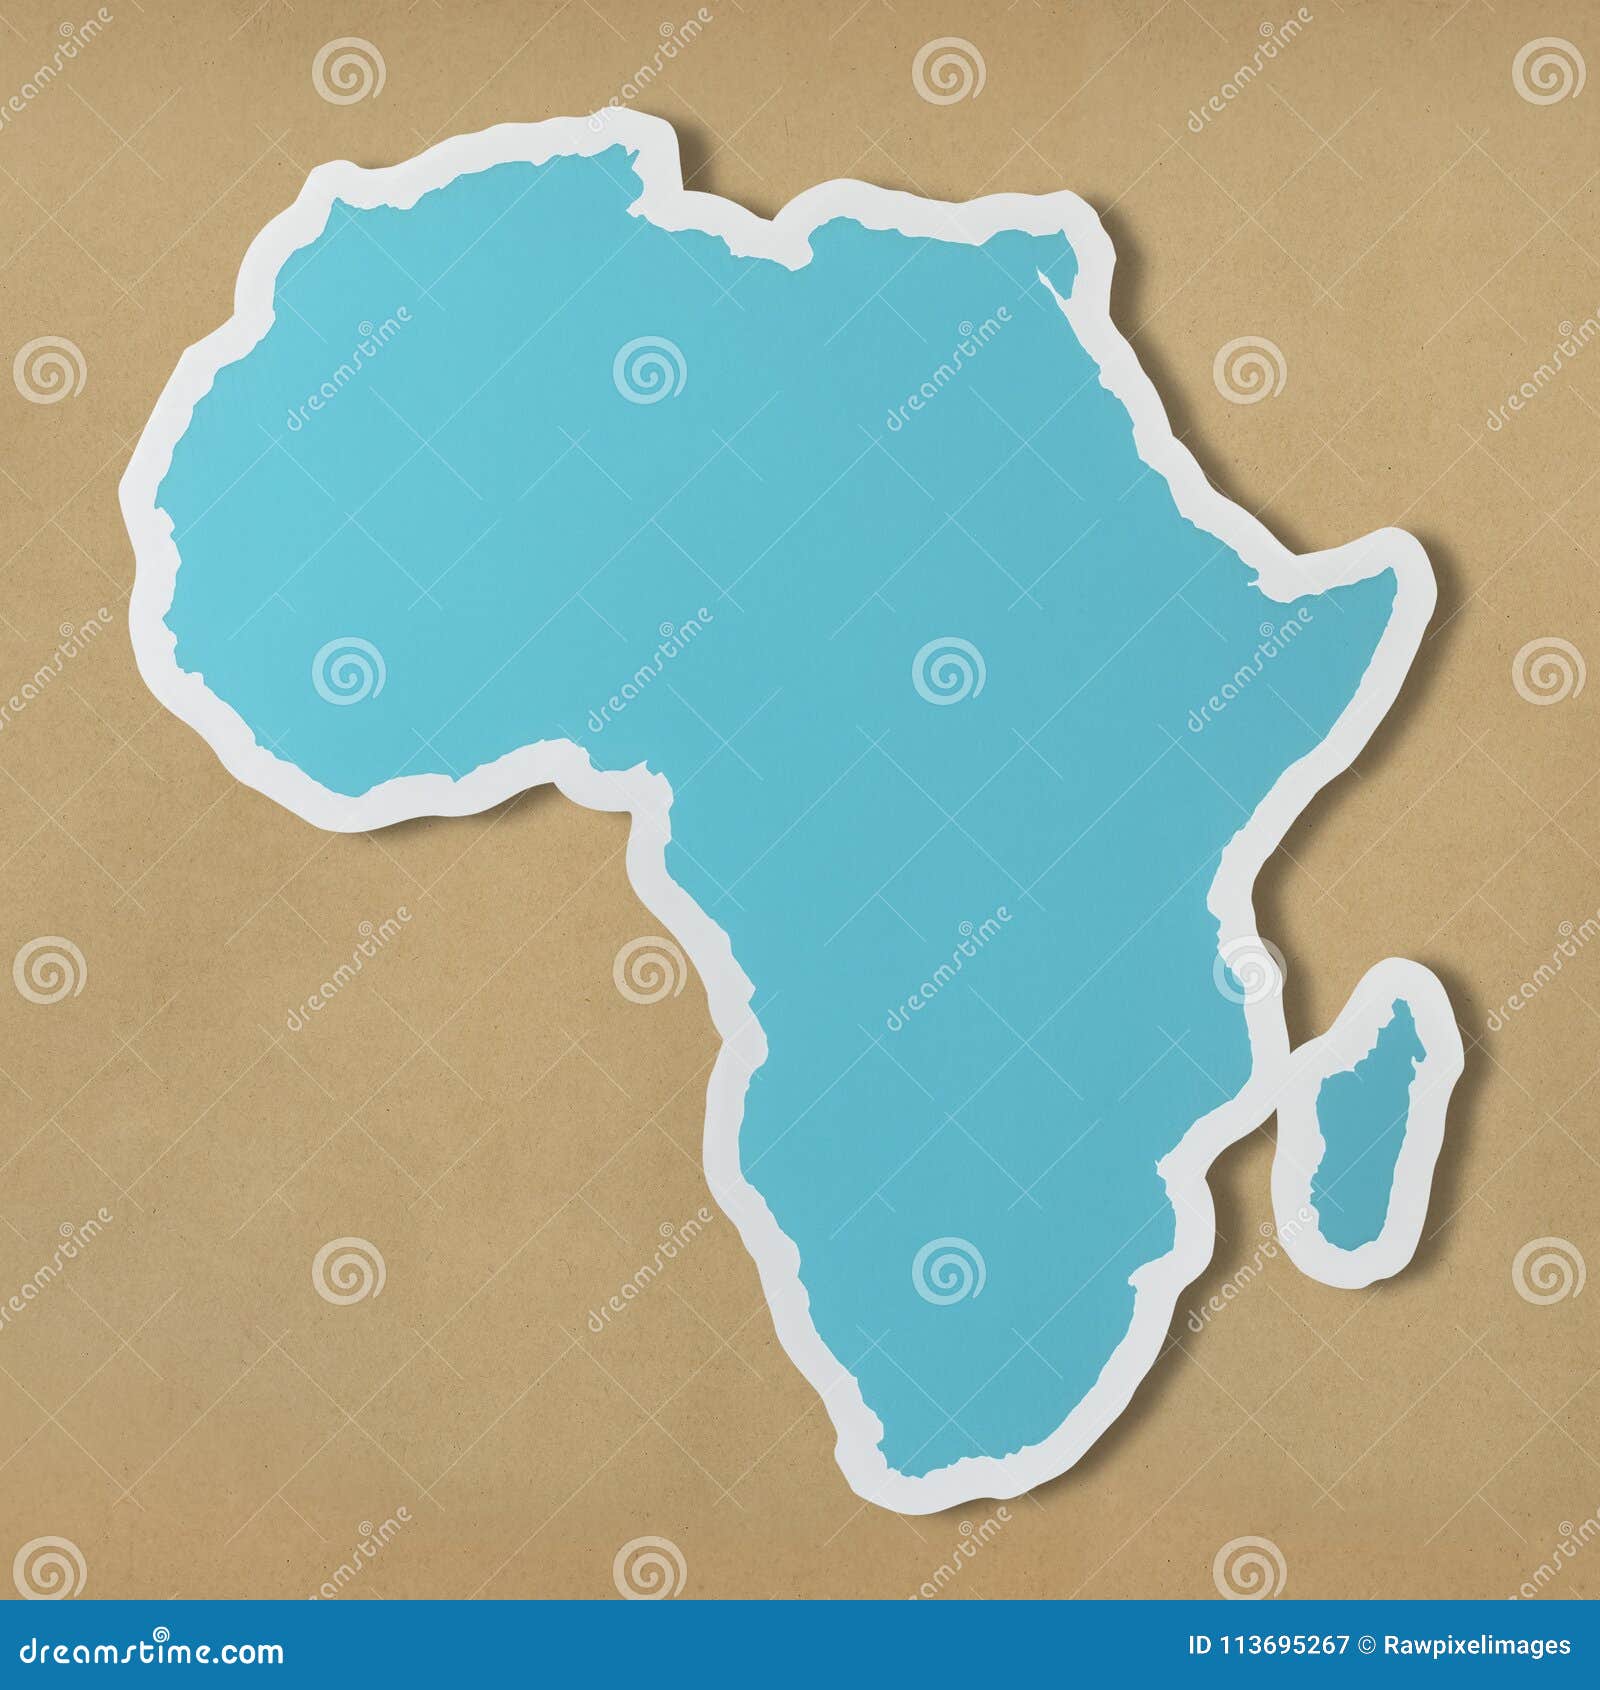 blue map of africa continent